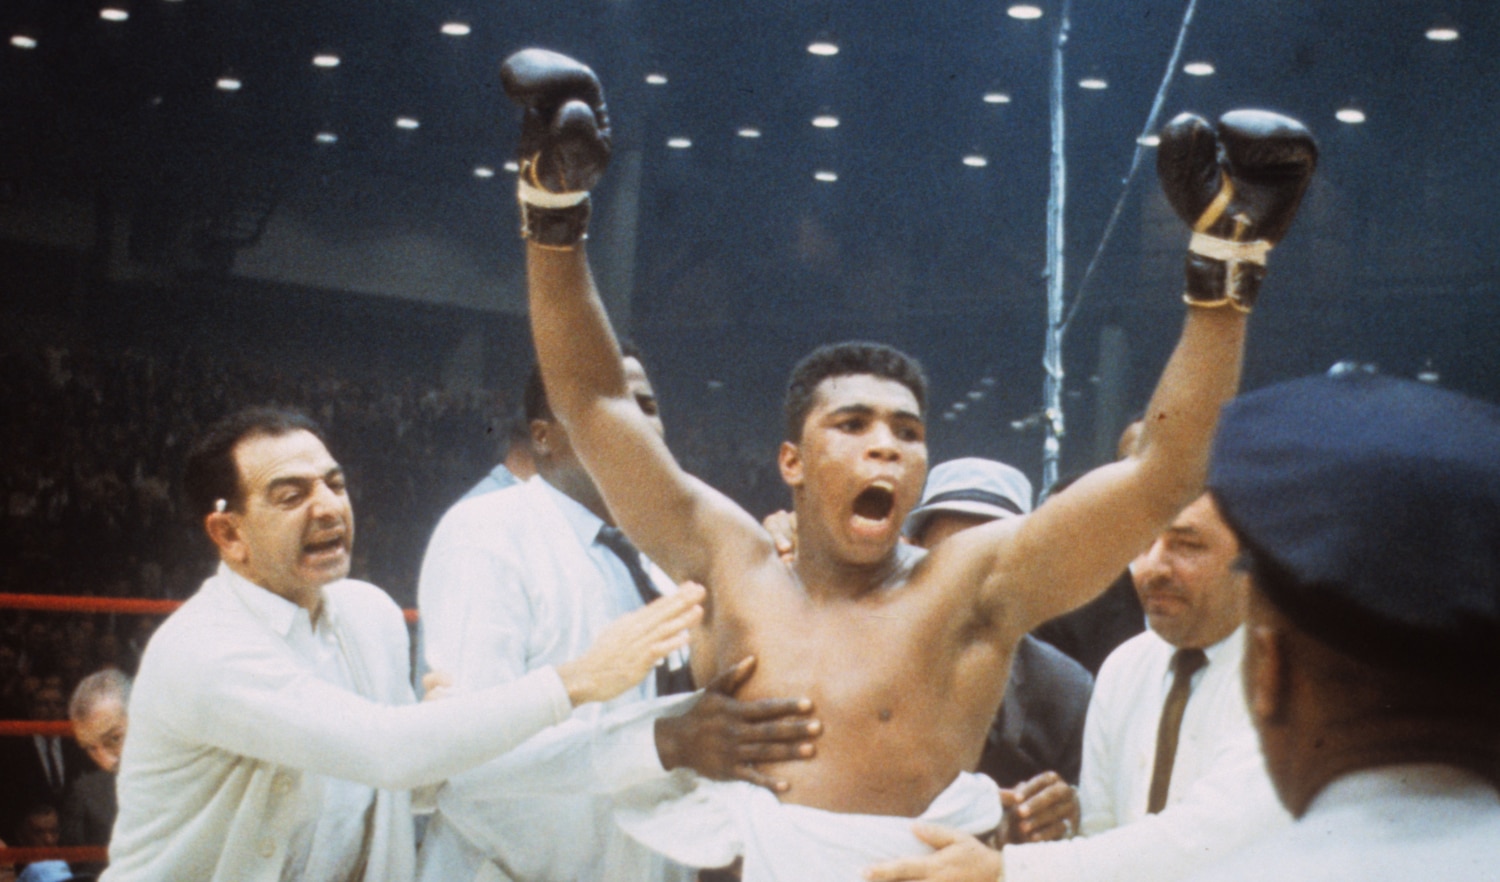 Photo of Muhammad Ali celebrating with gloves in the air